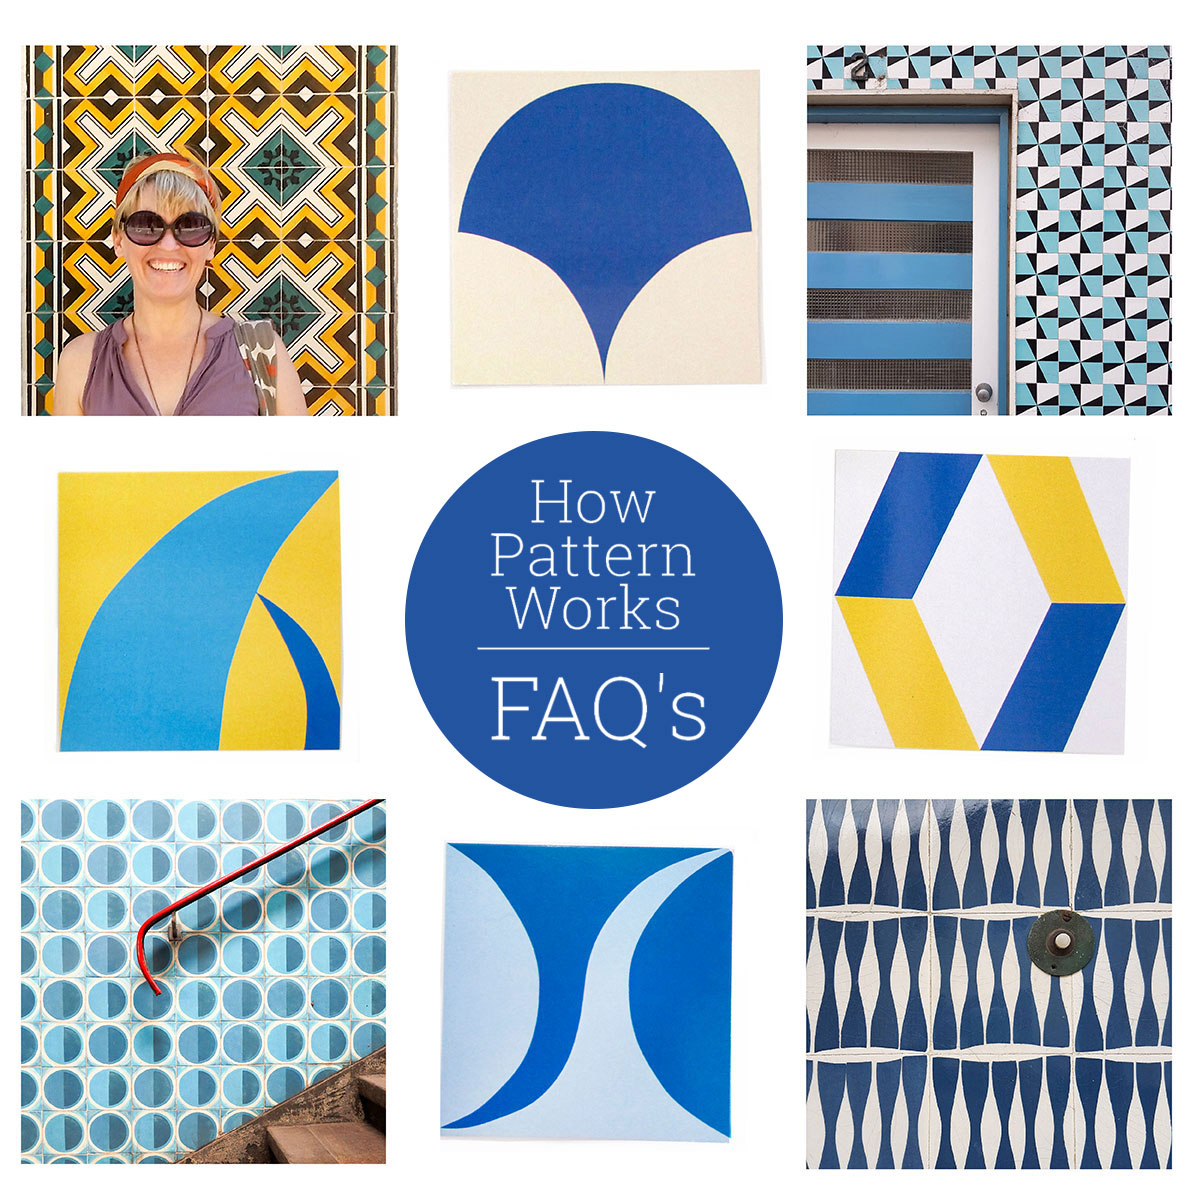 How Pattern Works course cover FAQ